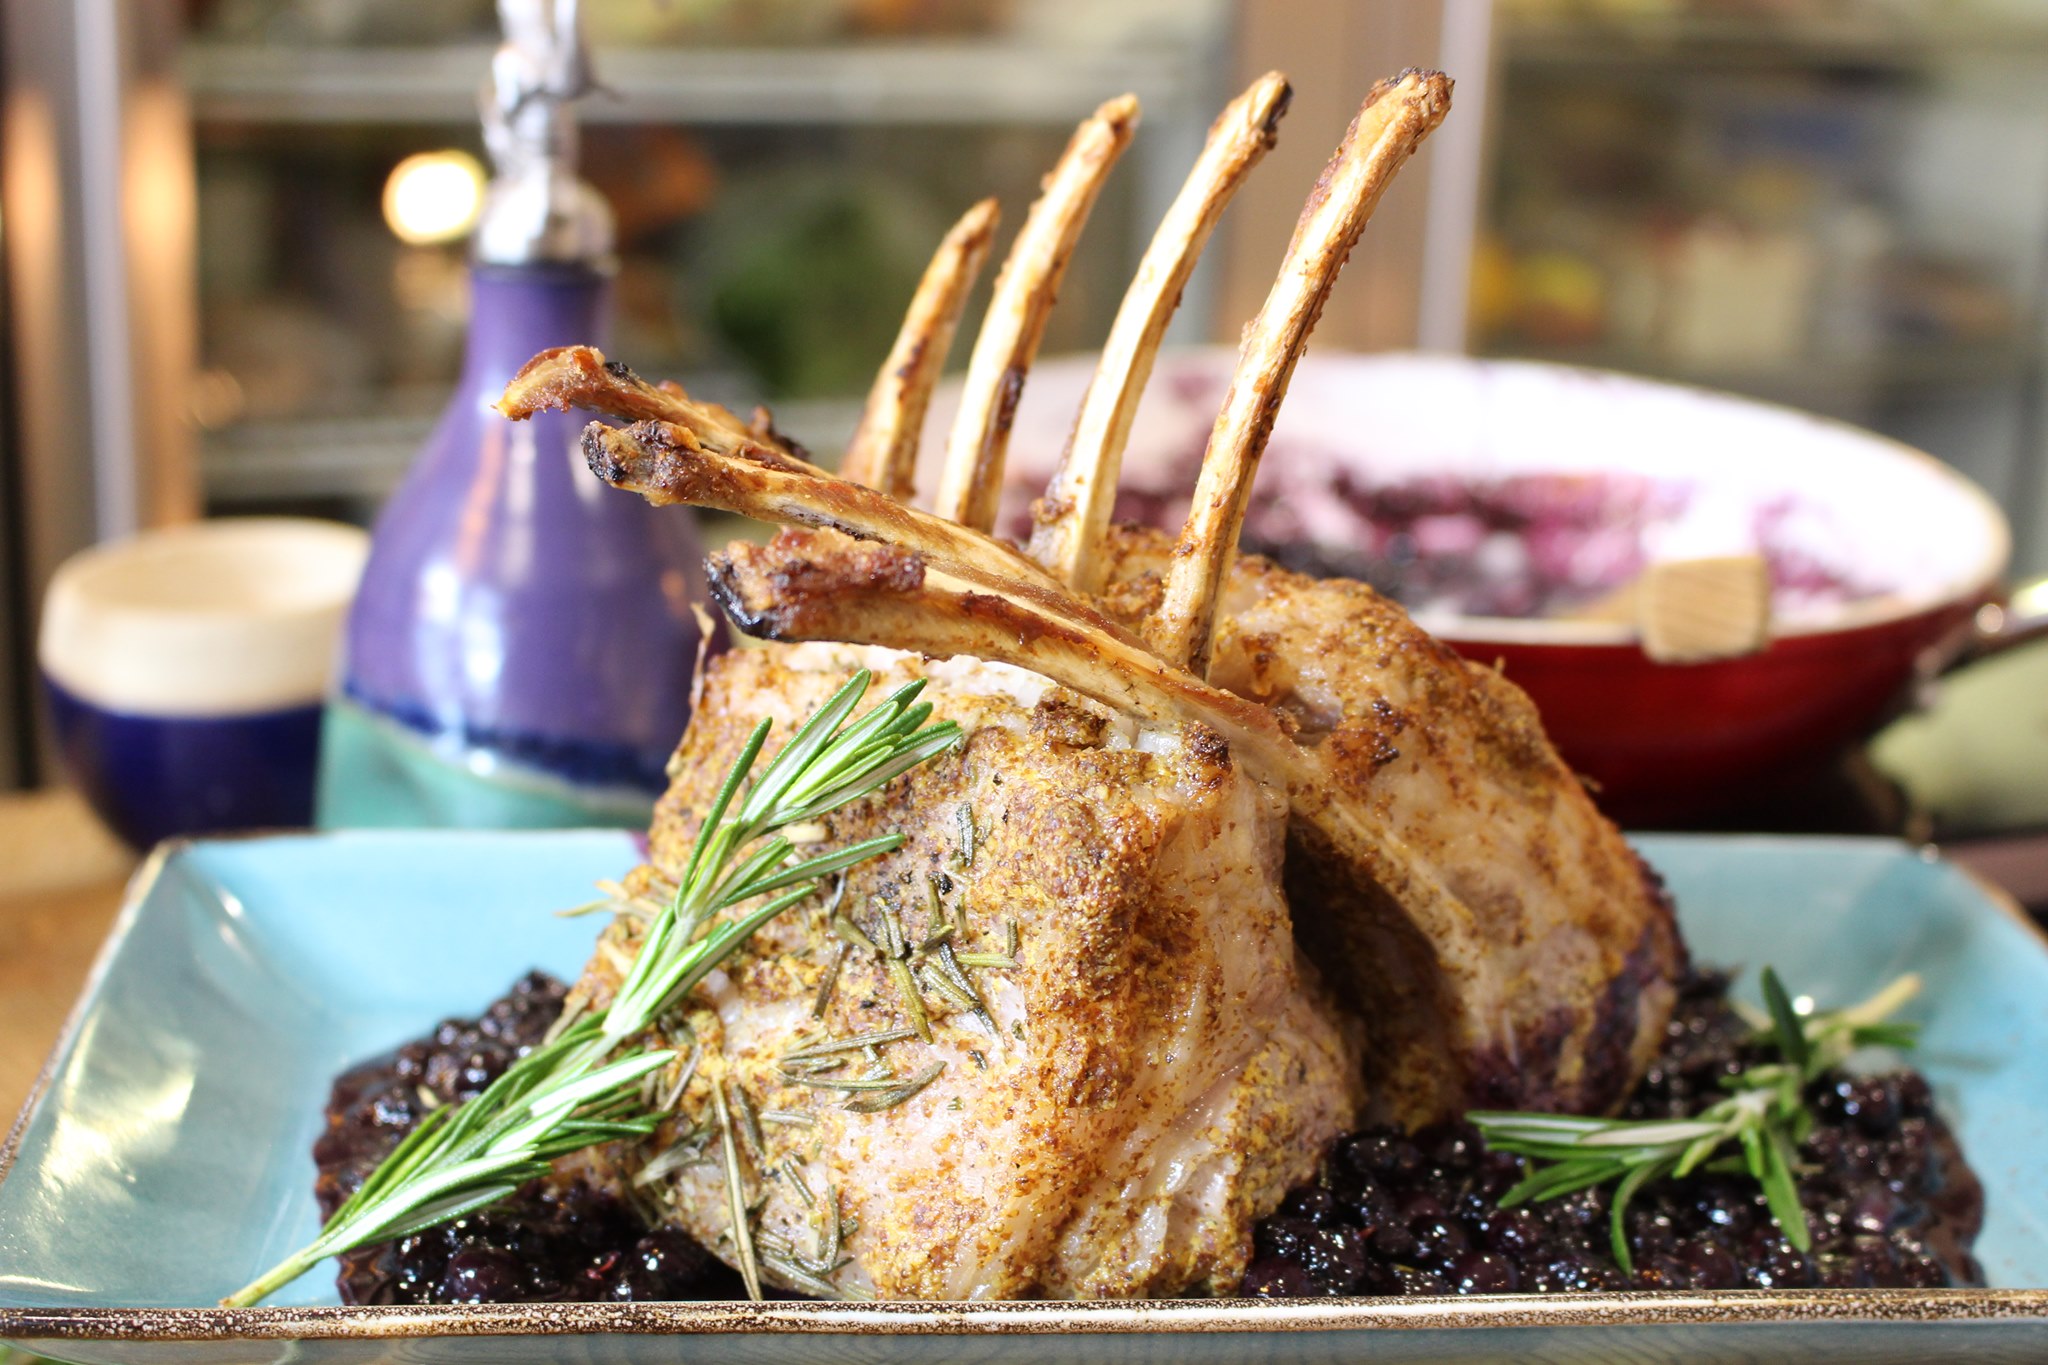 Northumberlamb “Rack of lamb” with a Wild Blueberry Rosemary Sauce